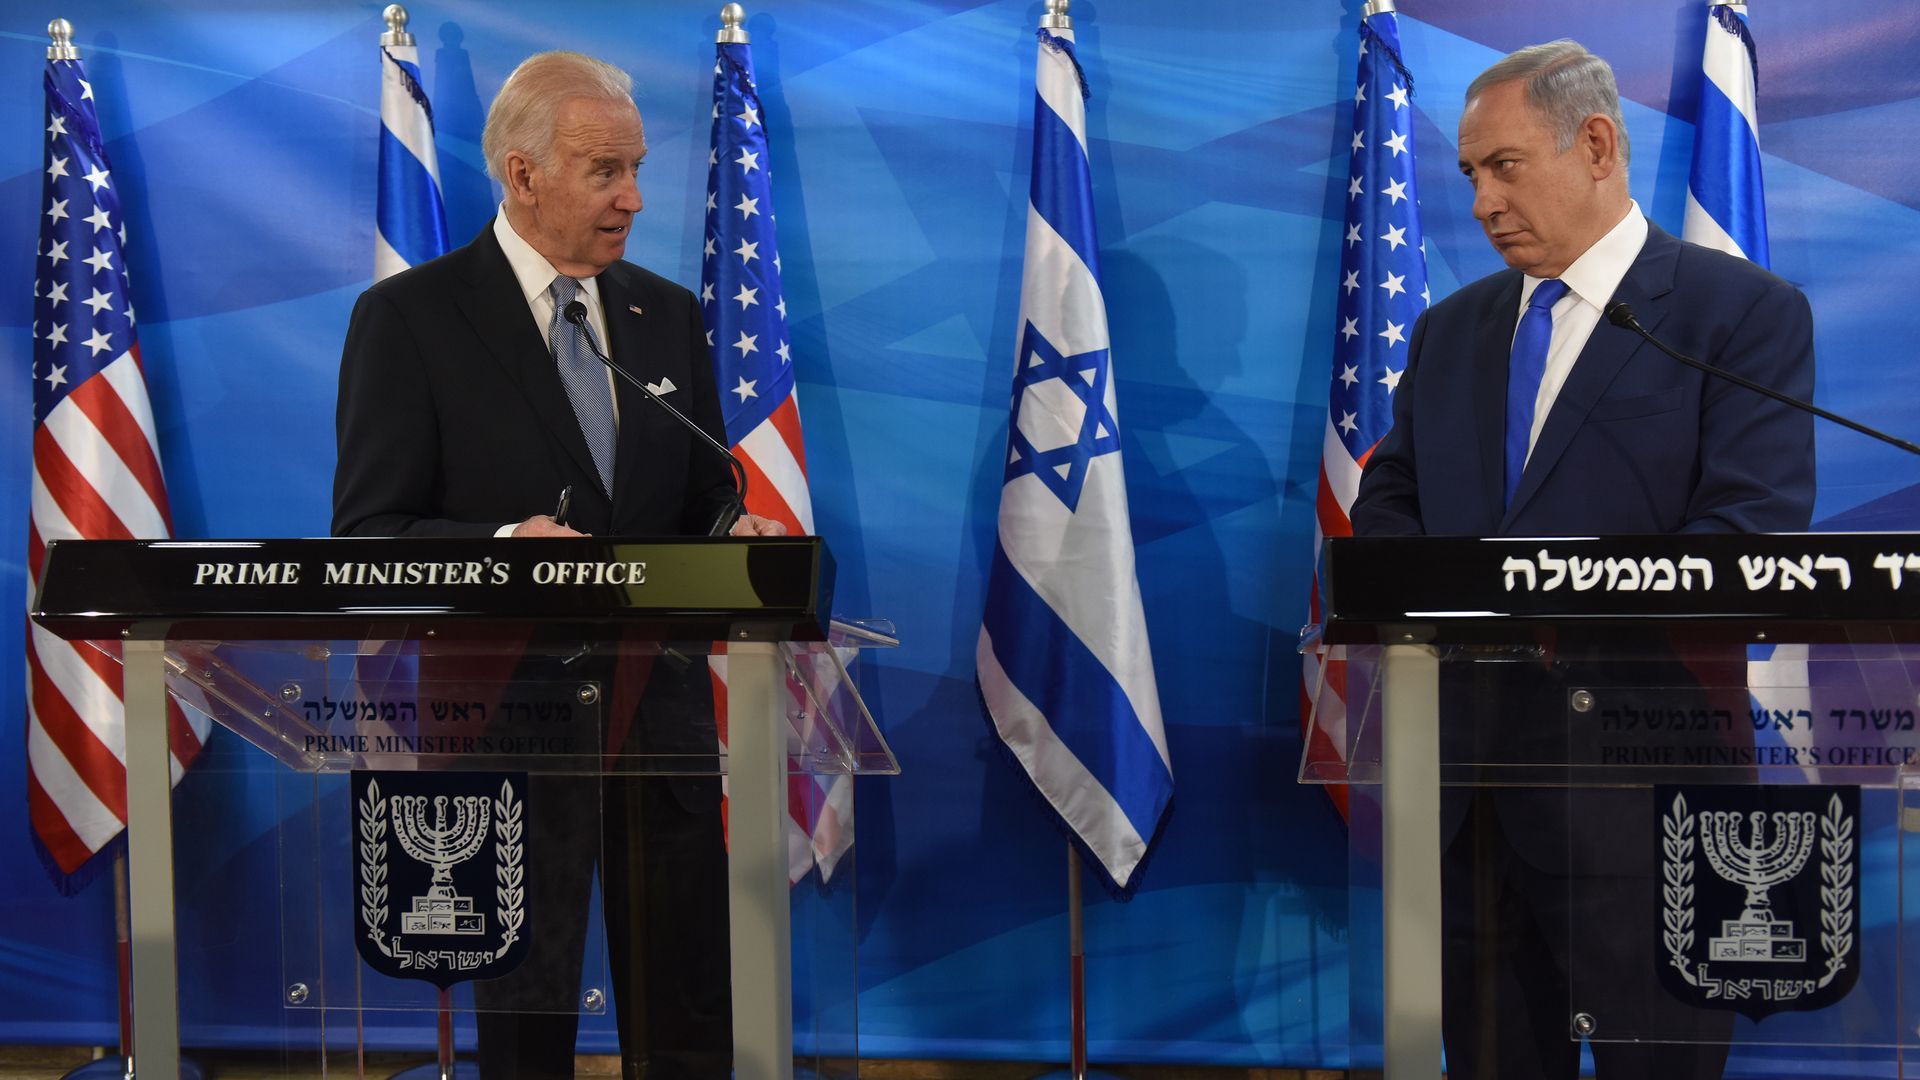 Biden and Netanyahu at a press conference in Jerusalem in March 2016. Photo: Debbie Hill/AFP via Getty Images